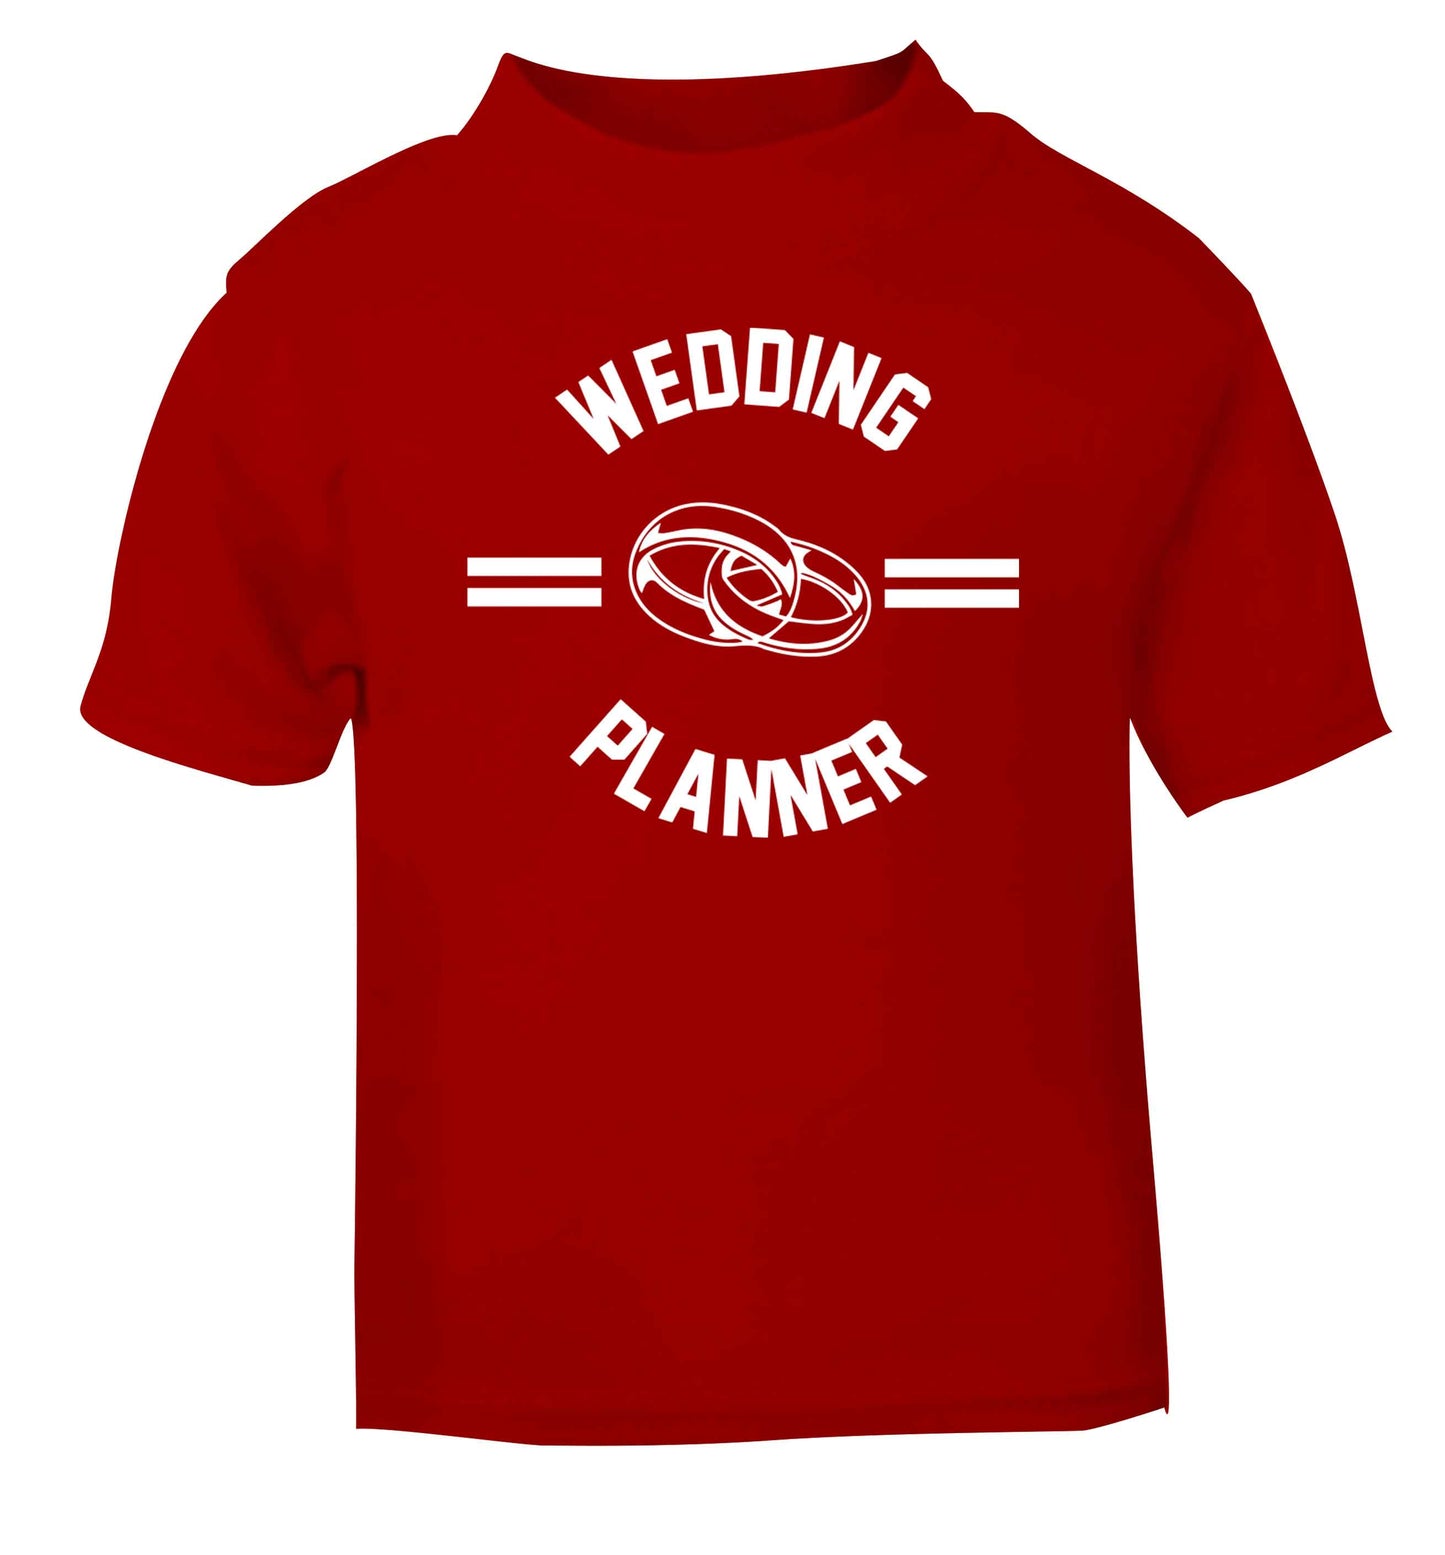 Wedding planner red baby toddler Tshirt 2 Years